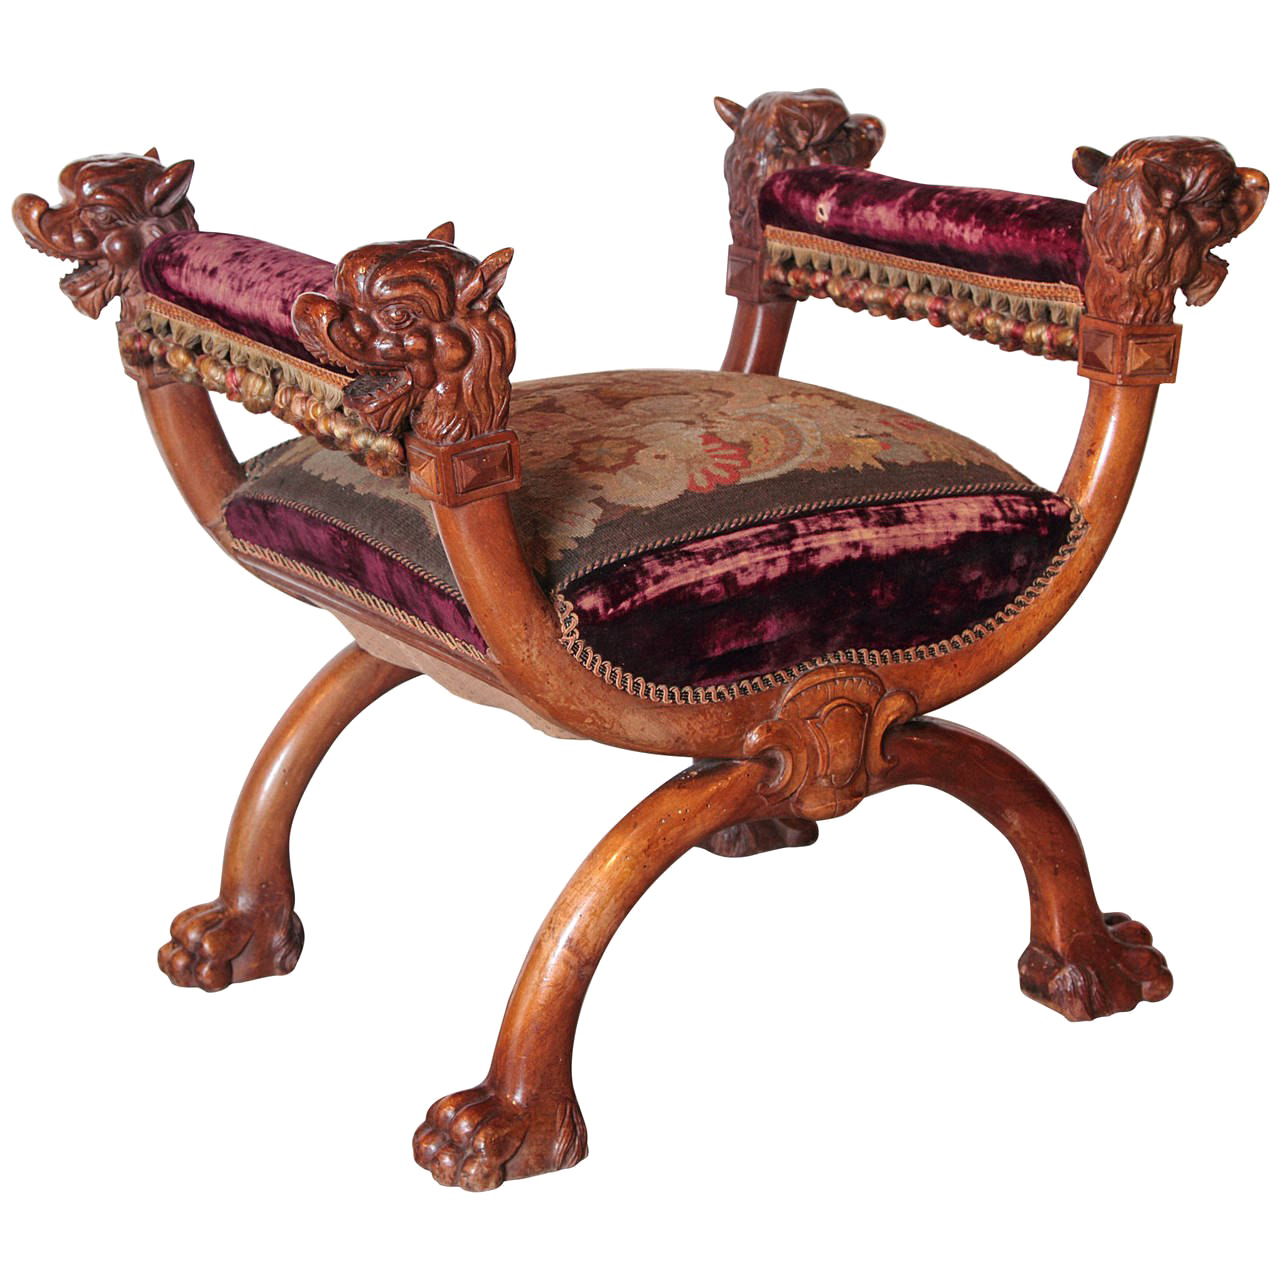 Curule Chair Image PNG File HD PNG Image